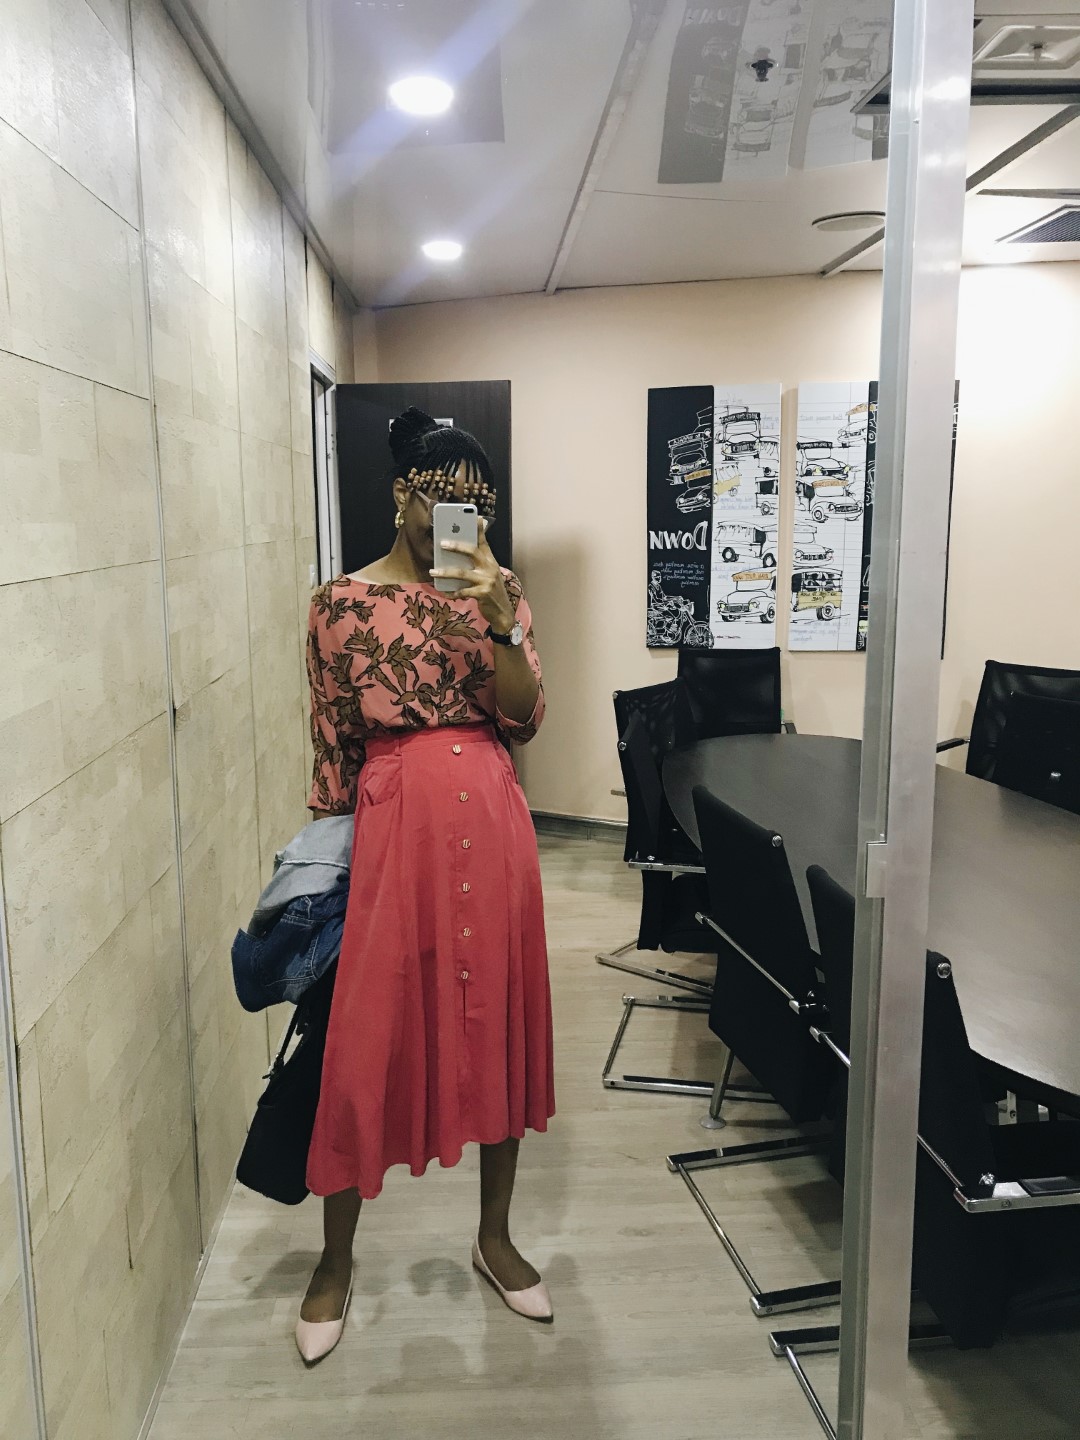 life lately - cassie daves mirror selfie wearing pink skater skirt and top